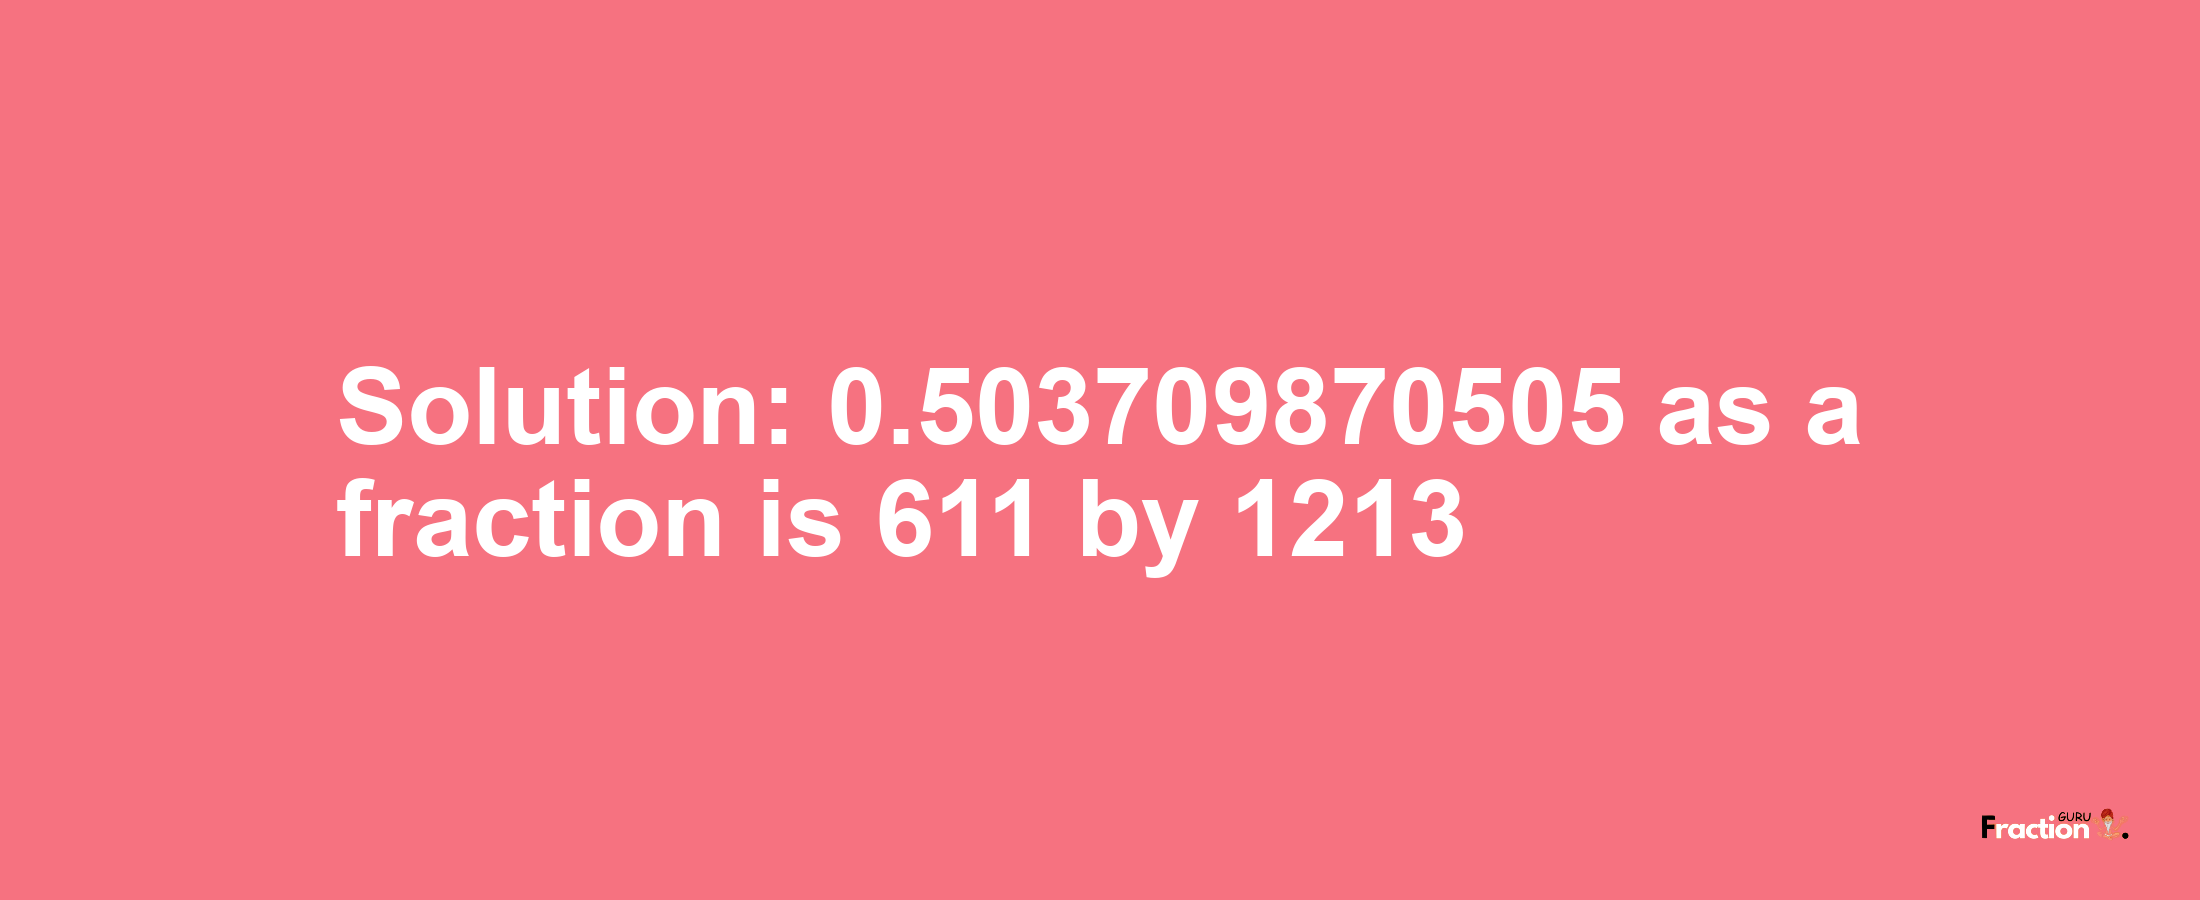 Solution:0.503709870505 as a fraction is 611/1213